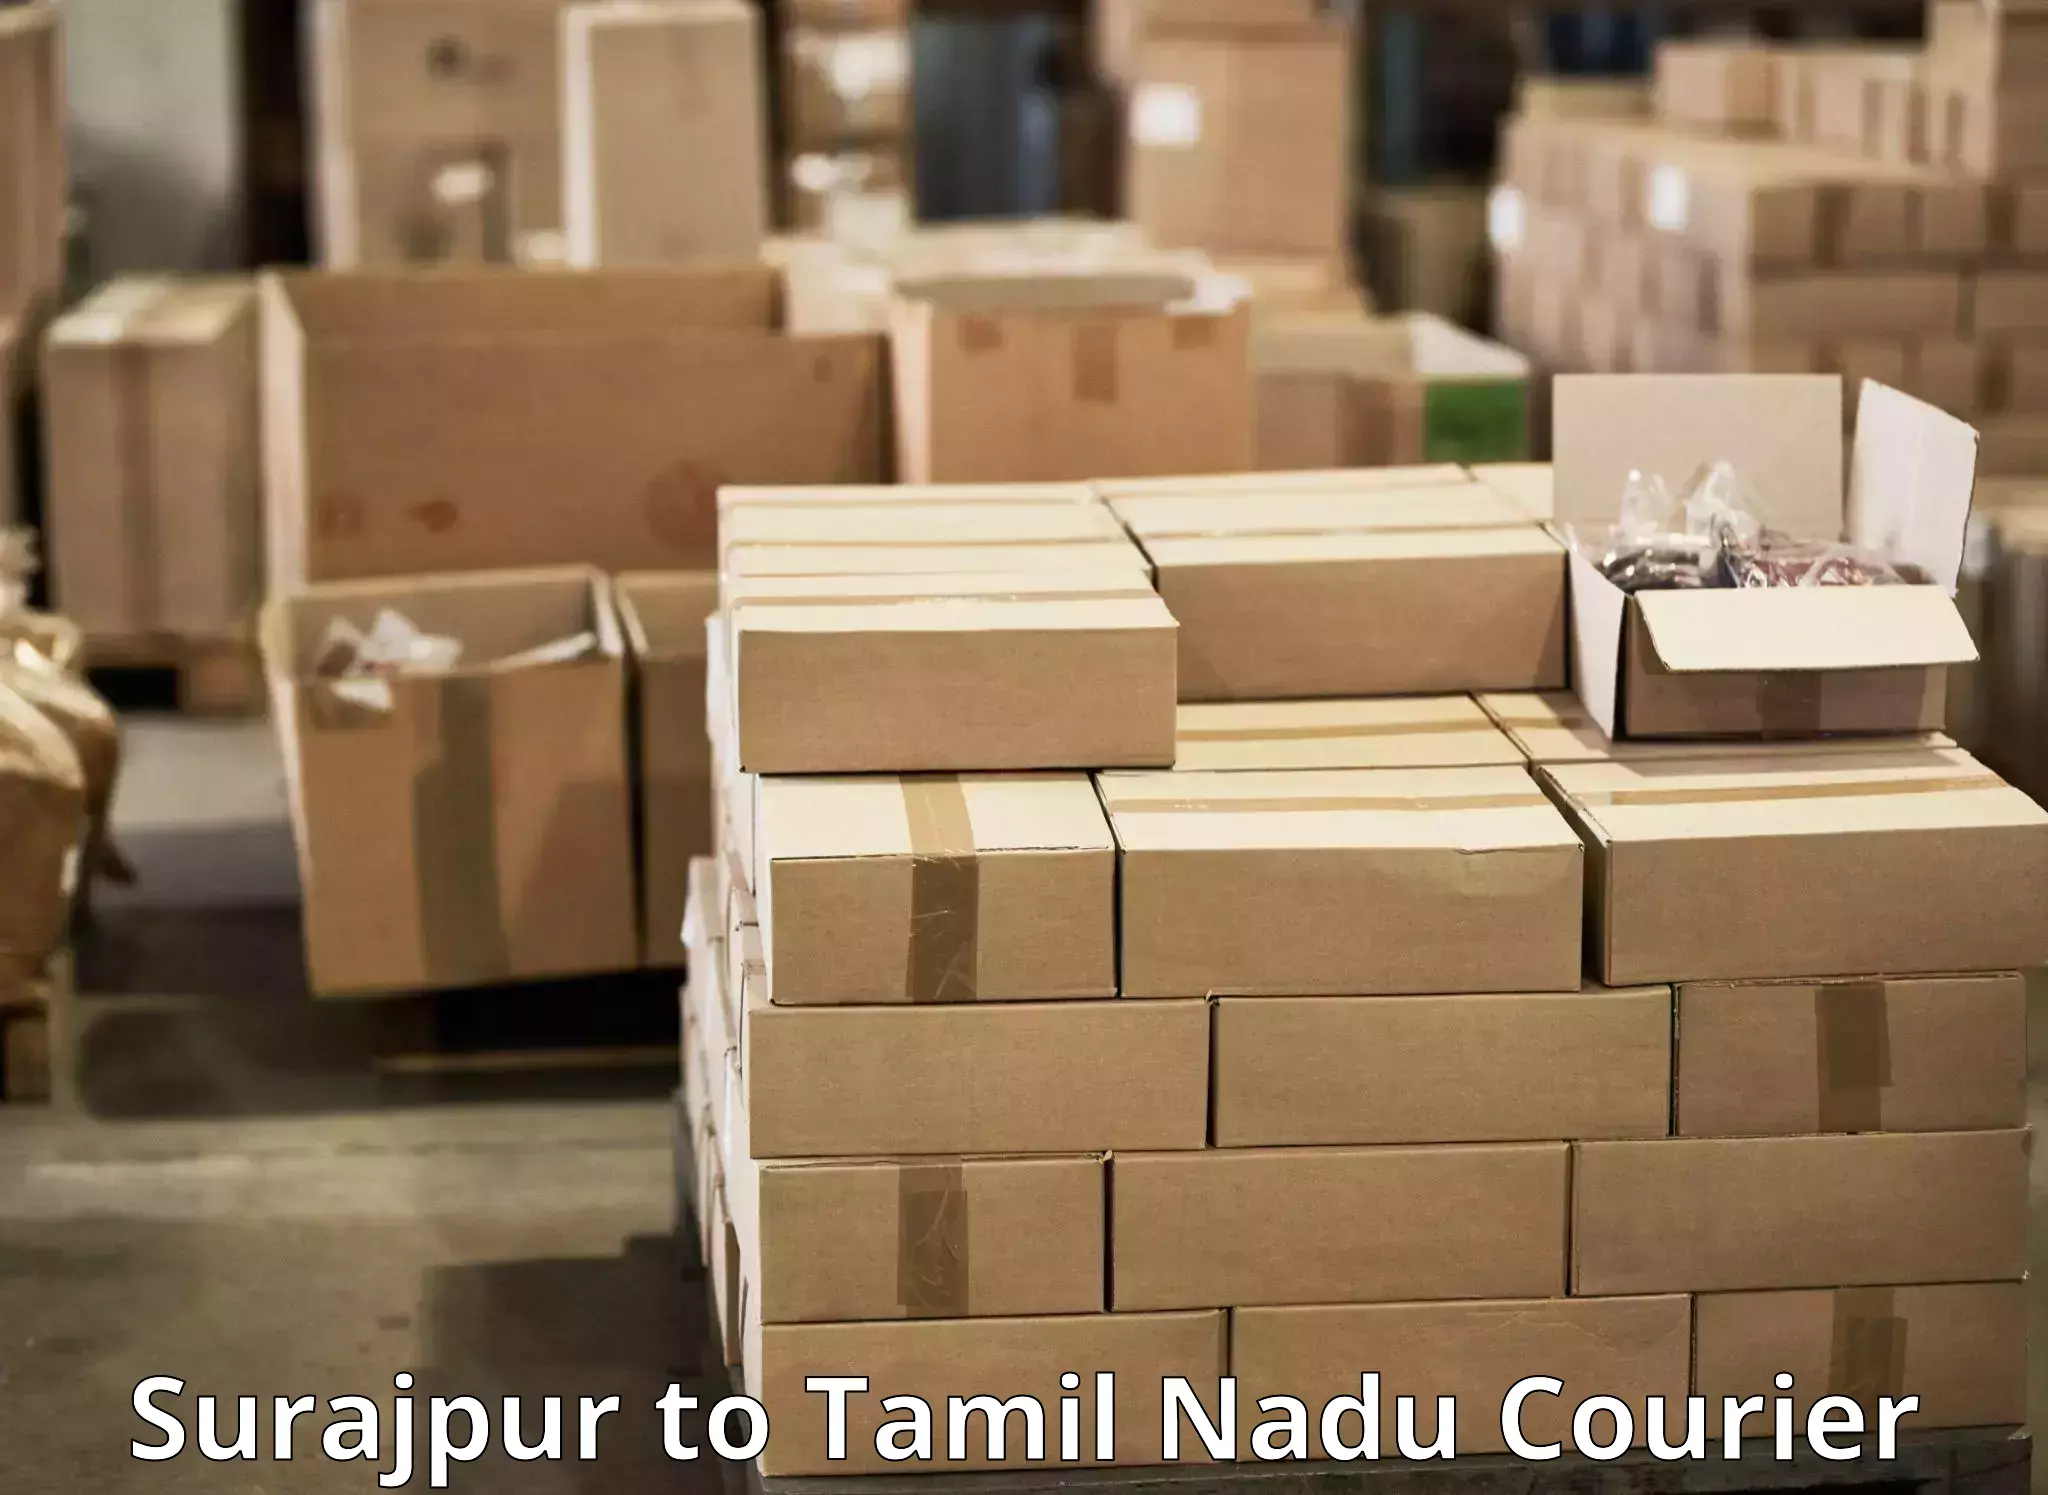 International courier networks Surajpur to Coimbatore